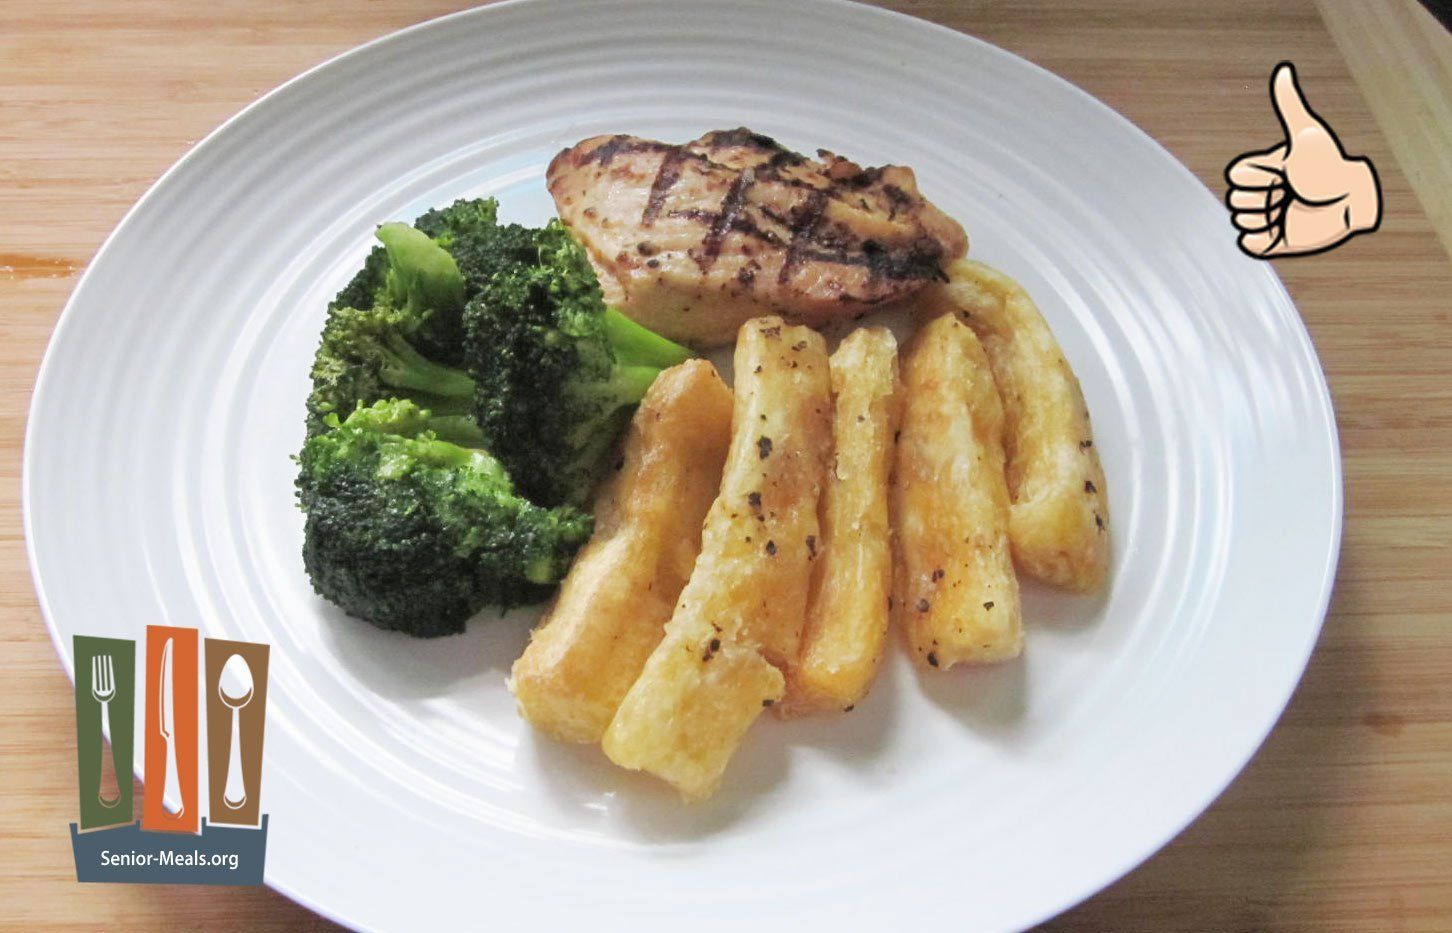 Herb Seasoned Grilled Chicken with Yucca Fries and Seared Broccoli